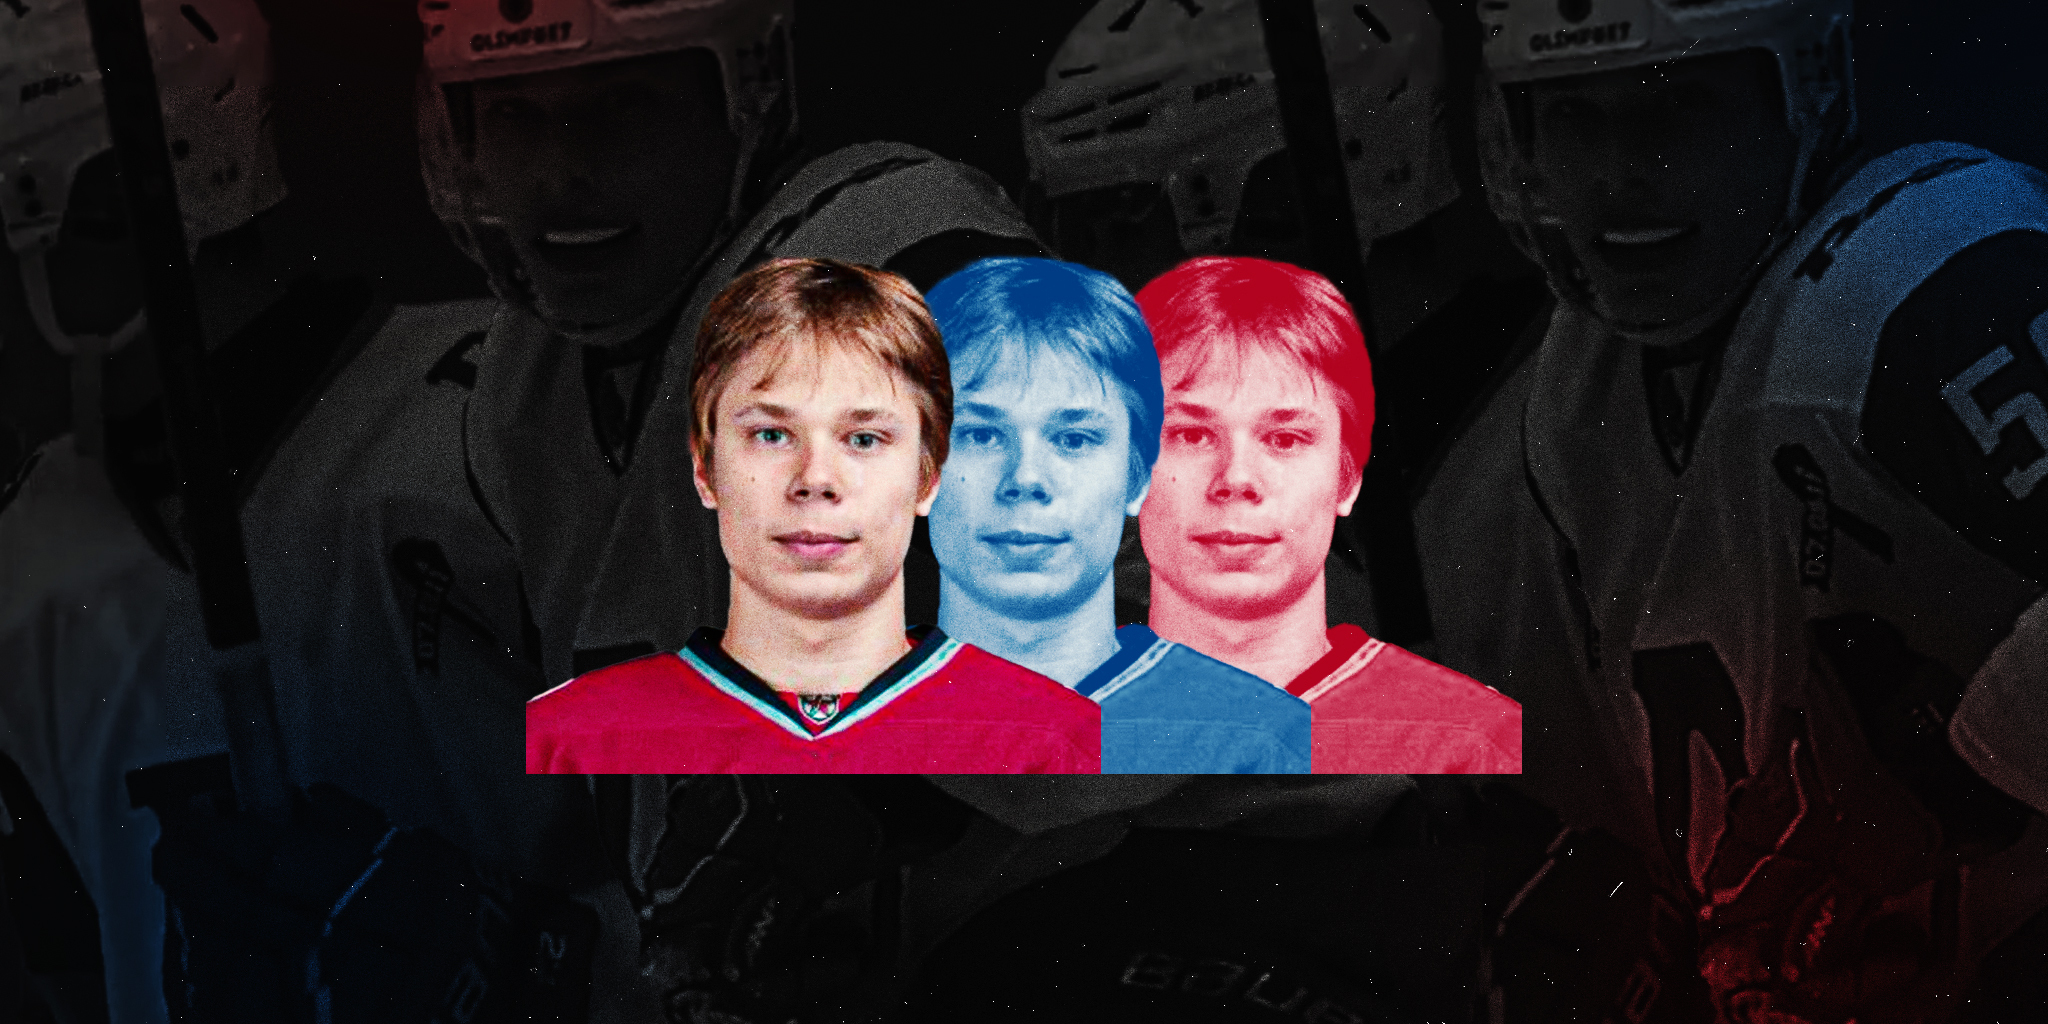 Daniil But is one of the mystery boxes in the 2023 NHL Draft Class